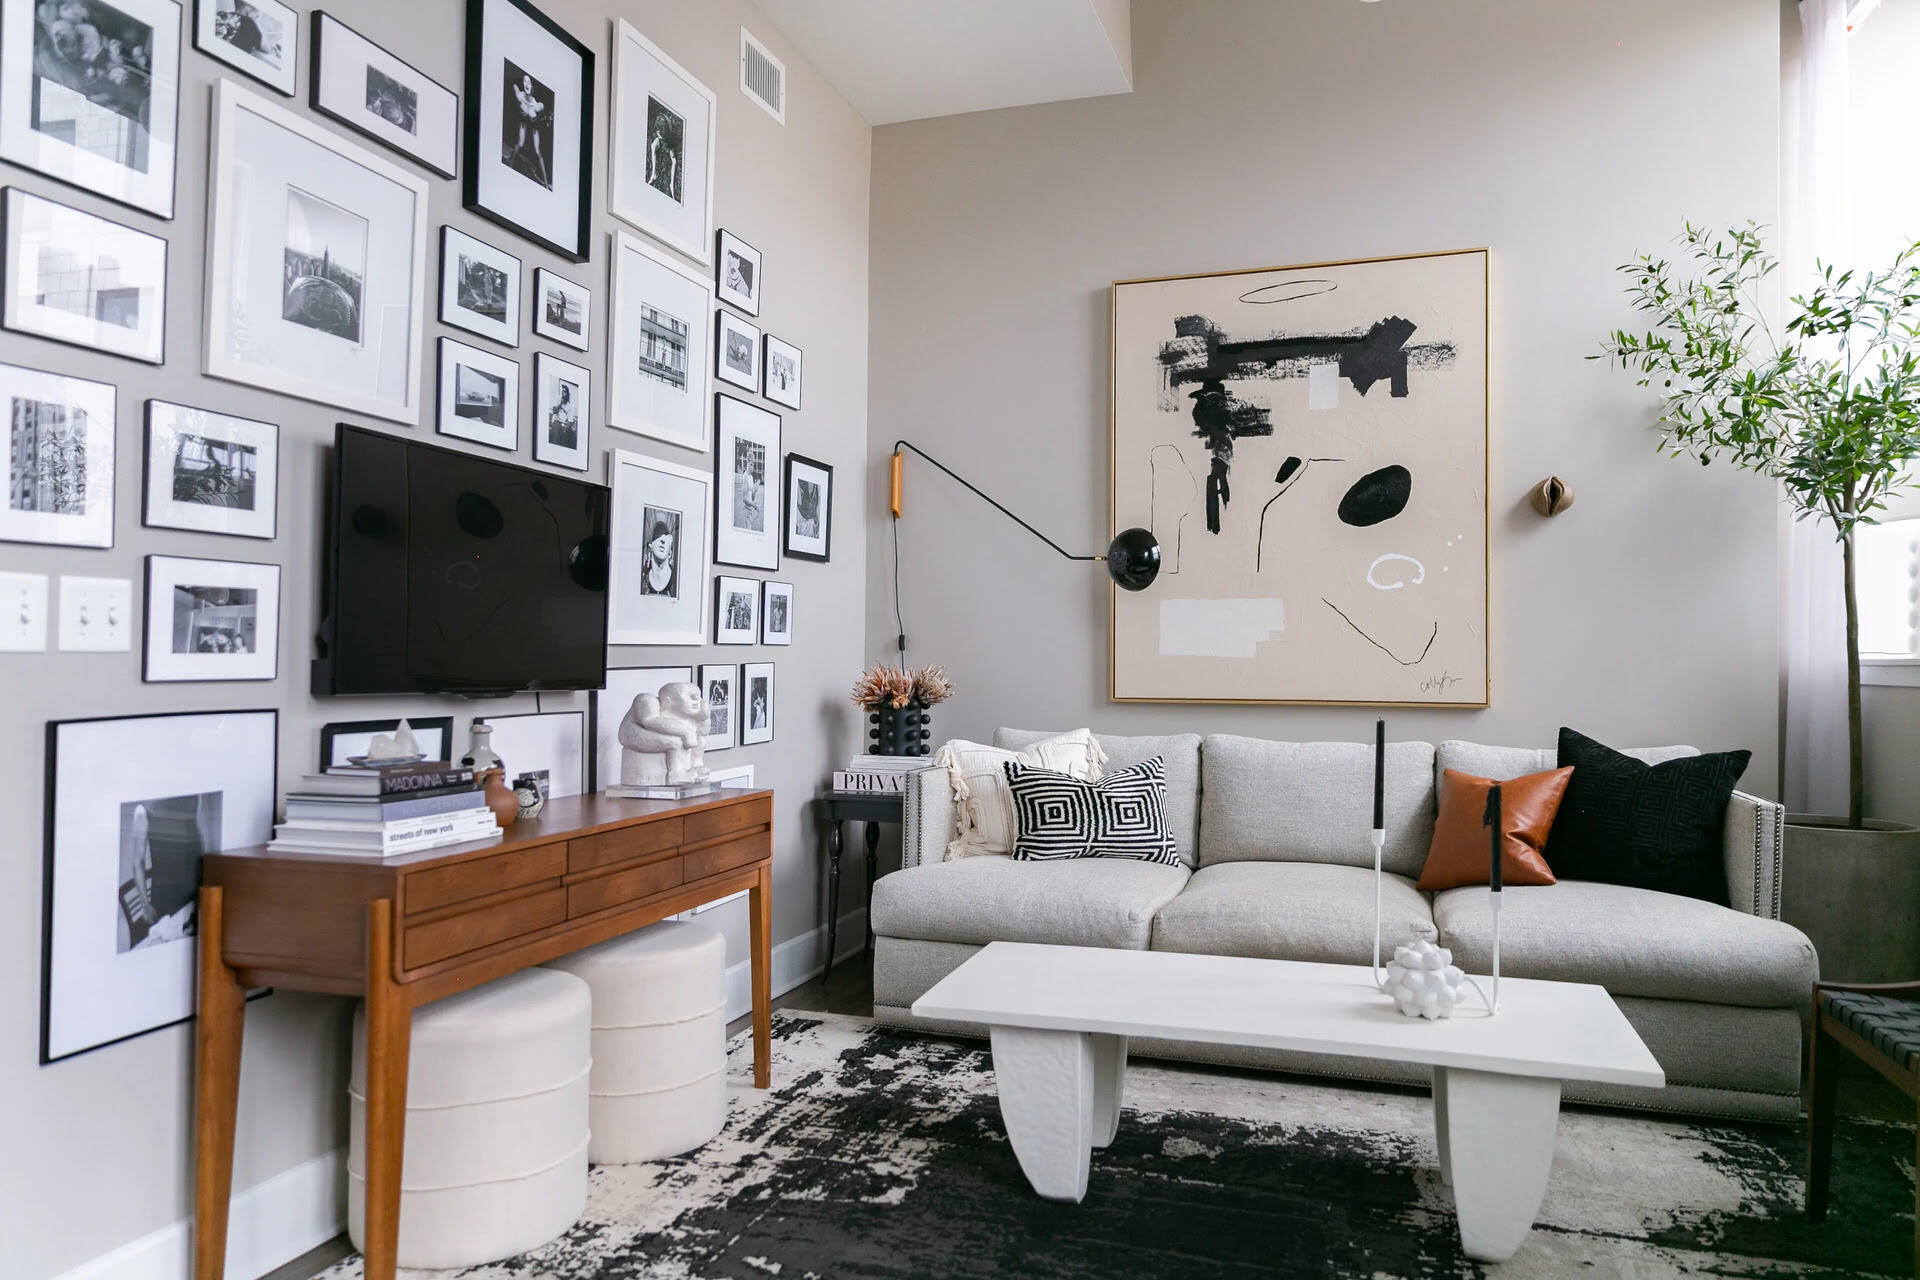 How To Display Family Photos In Living Room